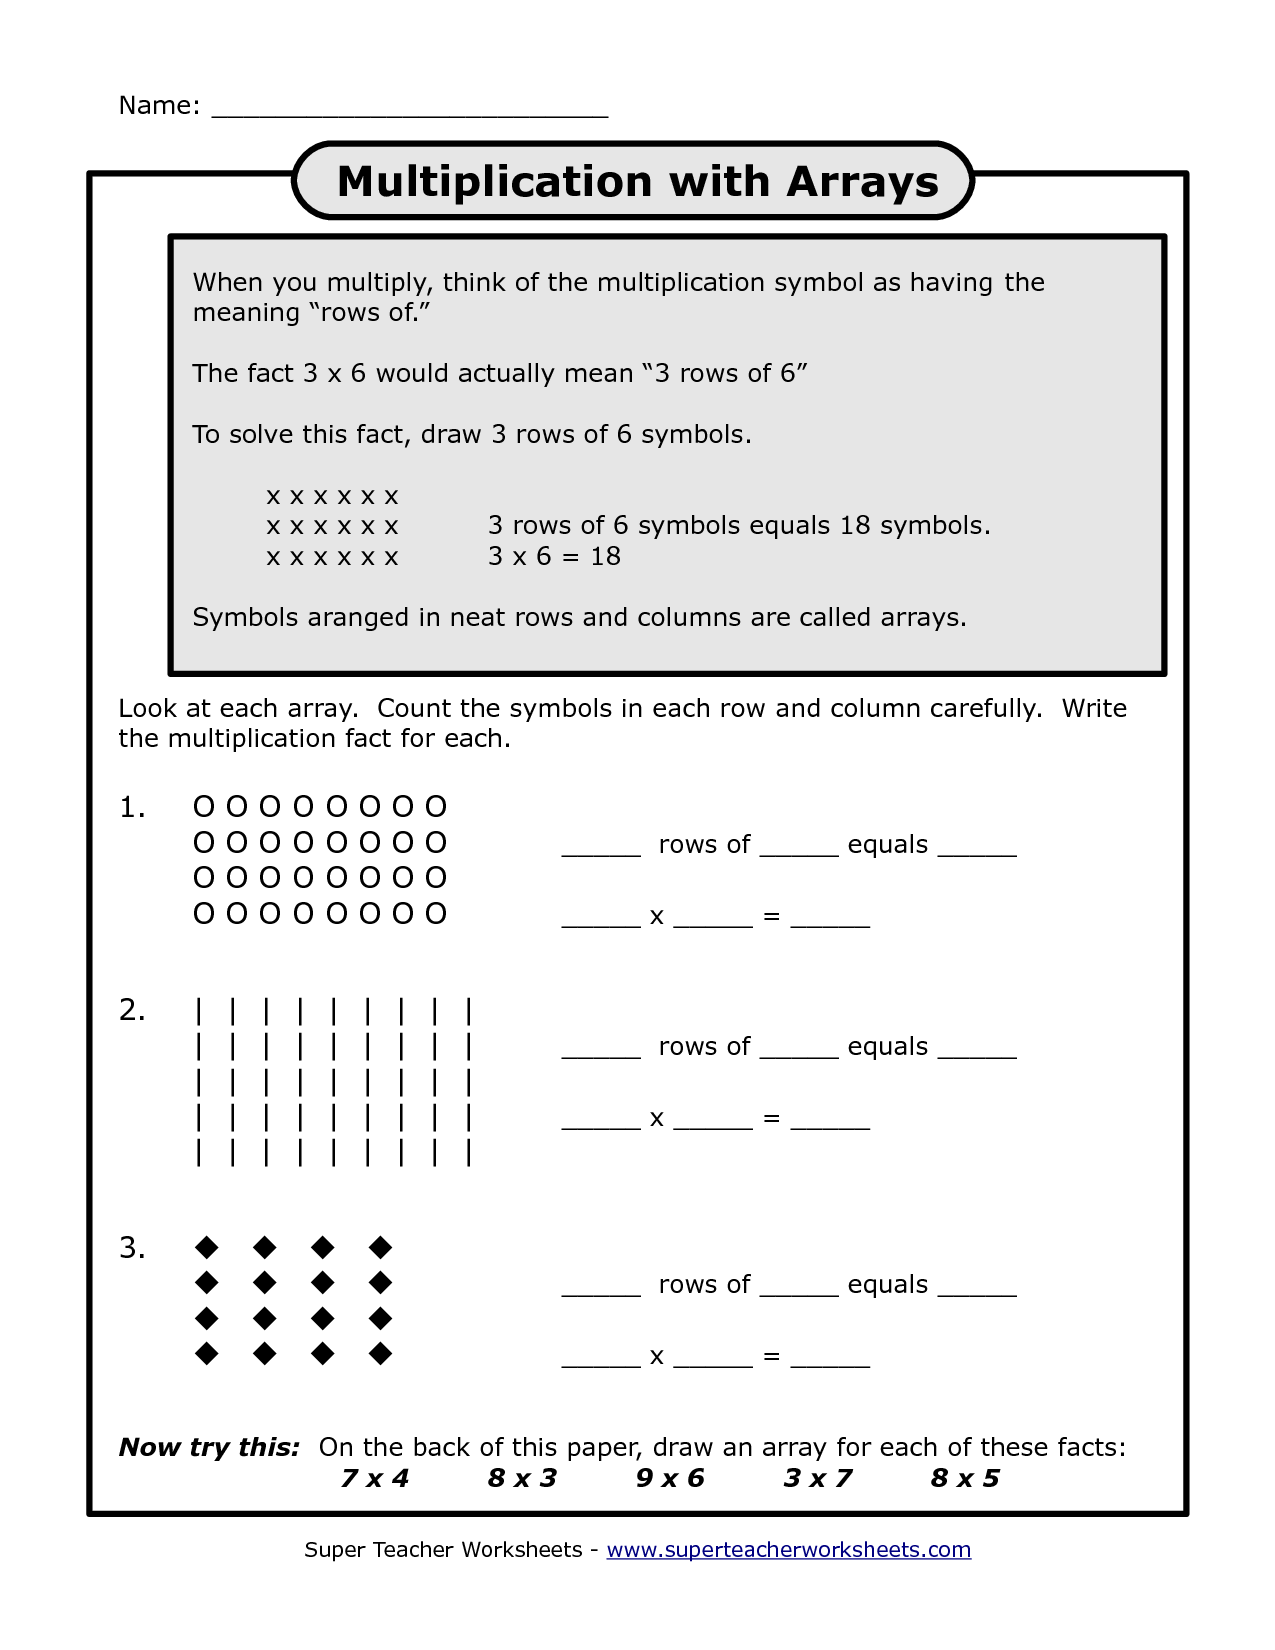 16-best-images-of-addition-arrays-worksheets-multiplication-repeated-addition-arrays